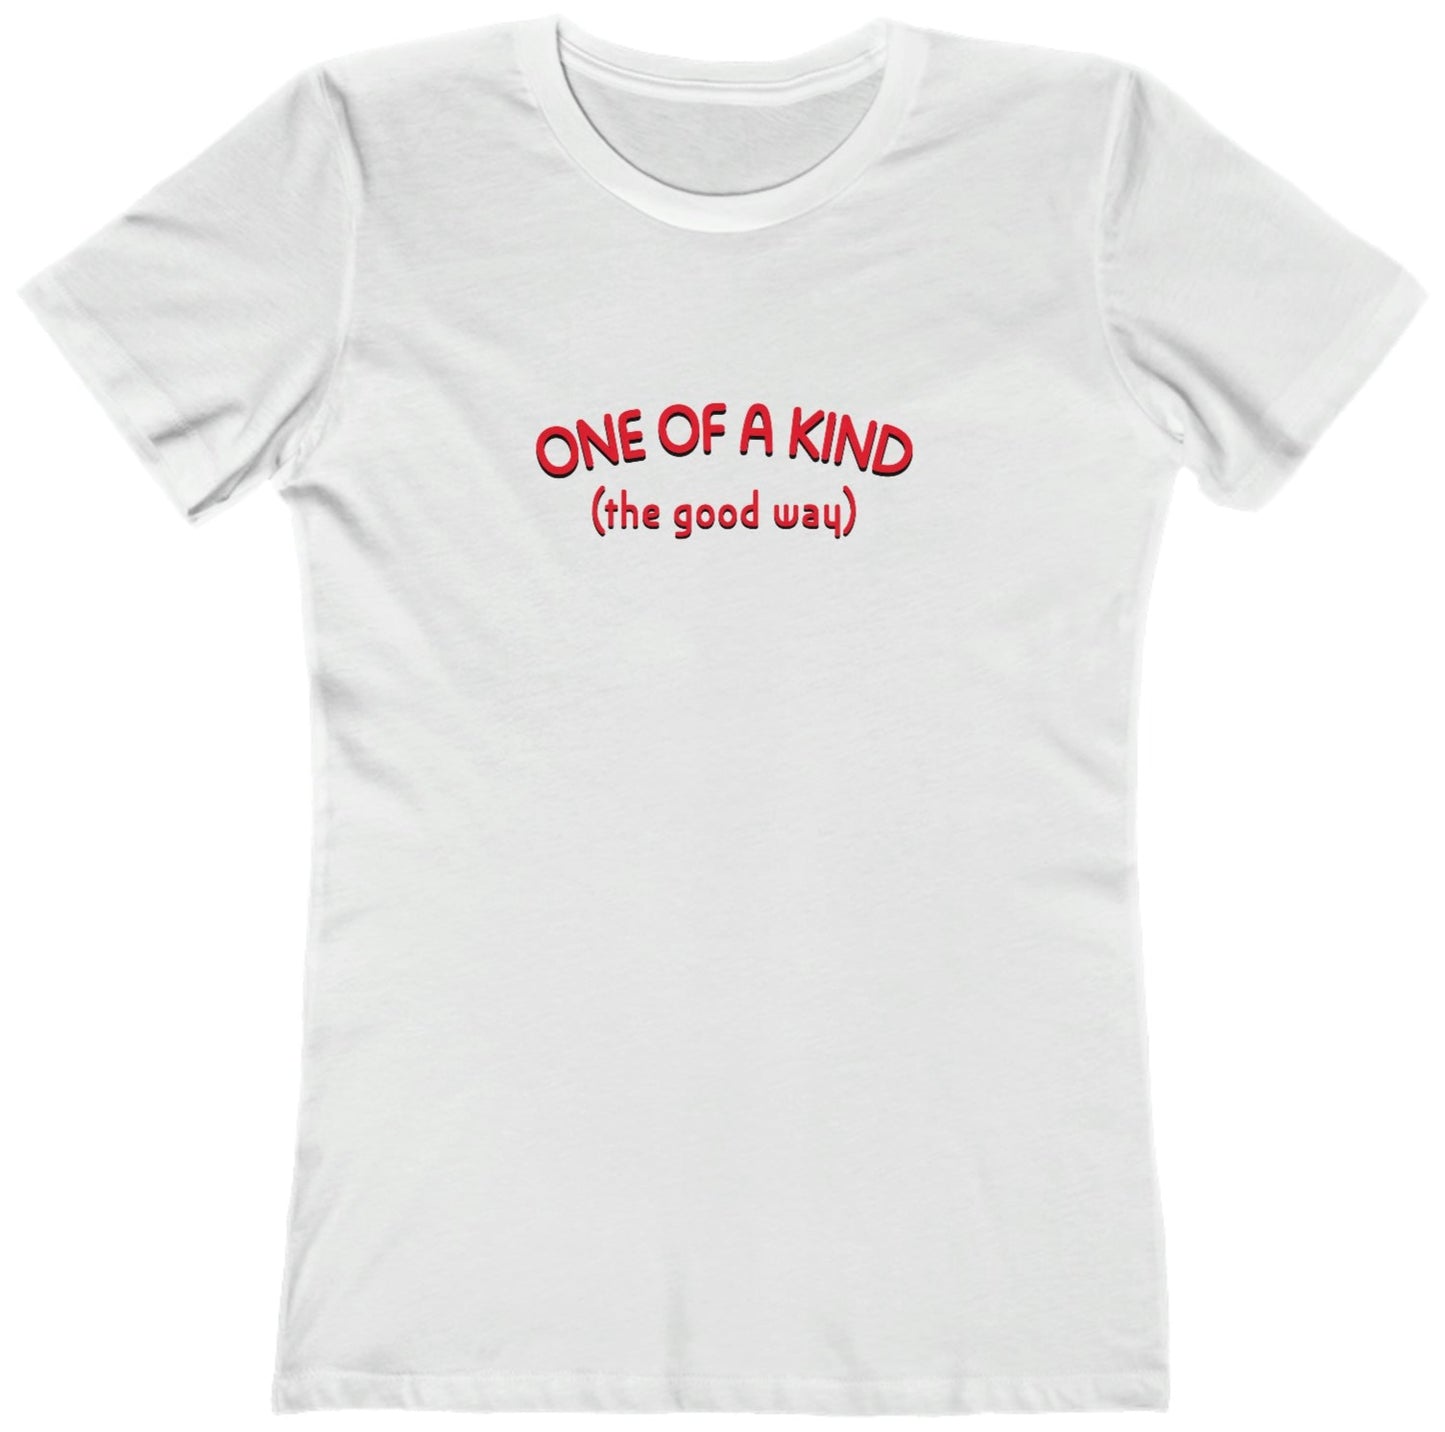 One of a Kind - Women's T-Shirt